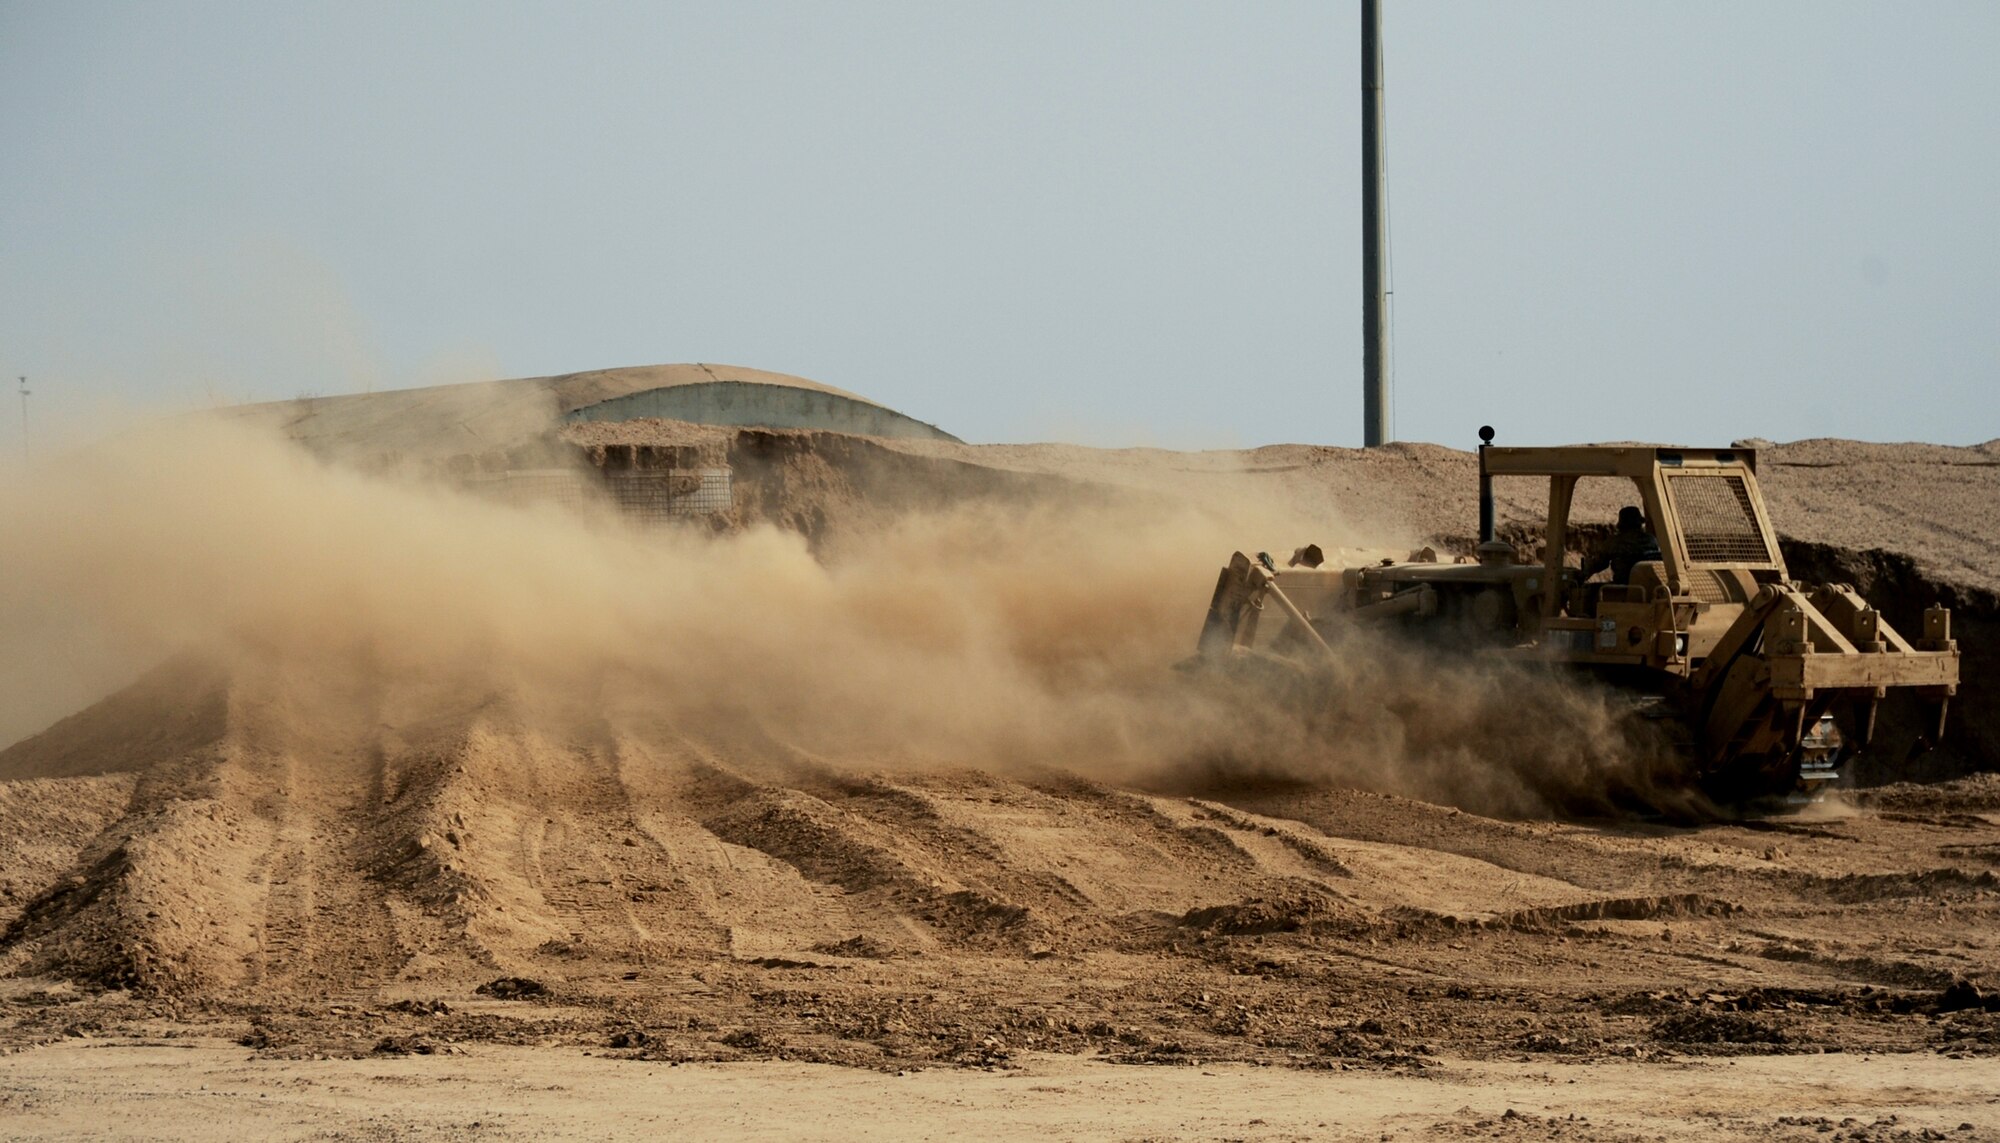 JOINT BASE BALAD, Iraq -- An Airman of the 732nd Expeditionary Civil Engineer Squadron stockpiles dirt with a bulldozer during construction of a new container repair yard Nov. 2, 2009. By using containers repaired here instead of purchasing new ones, the projected savings total more than $100 million as military assets withdraw from Iraq. (U.S. Air Force photo/Senior Airman Christopher Hubenthal)